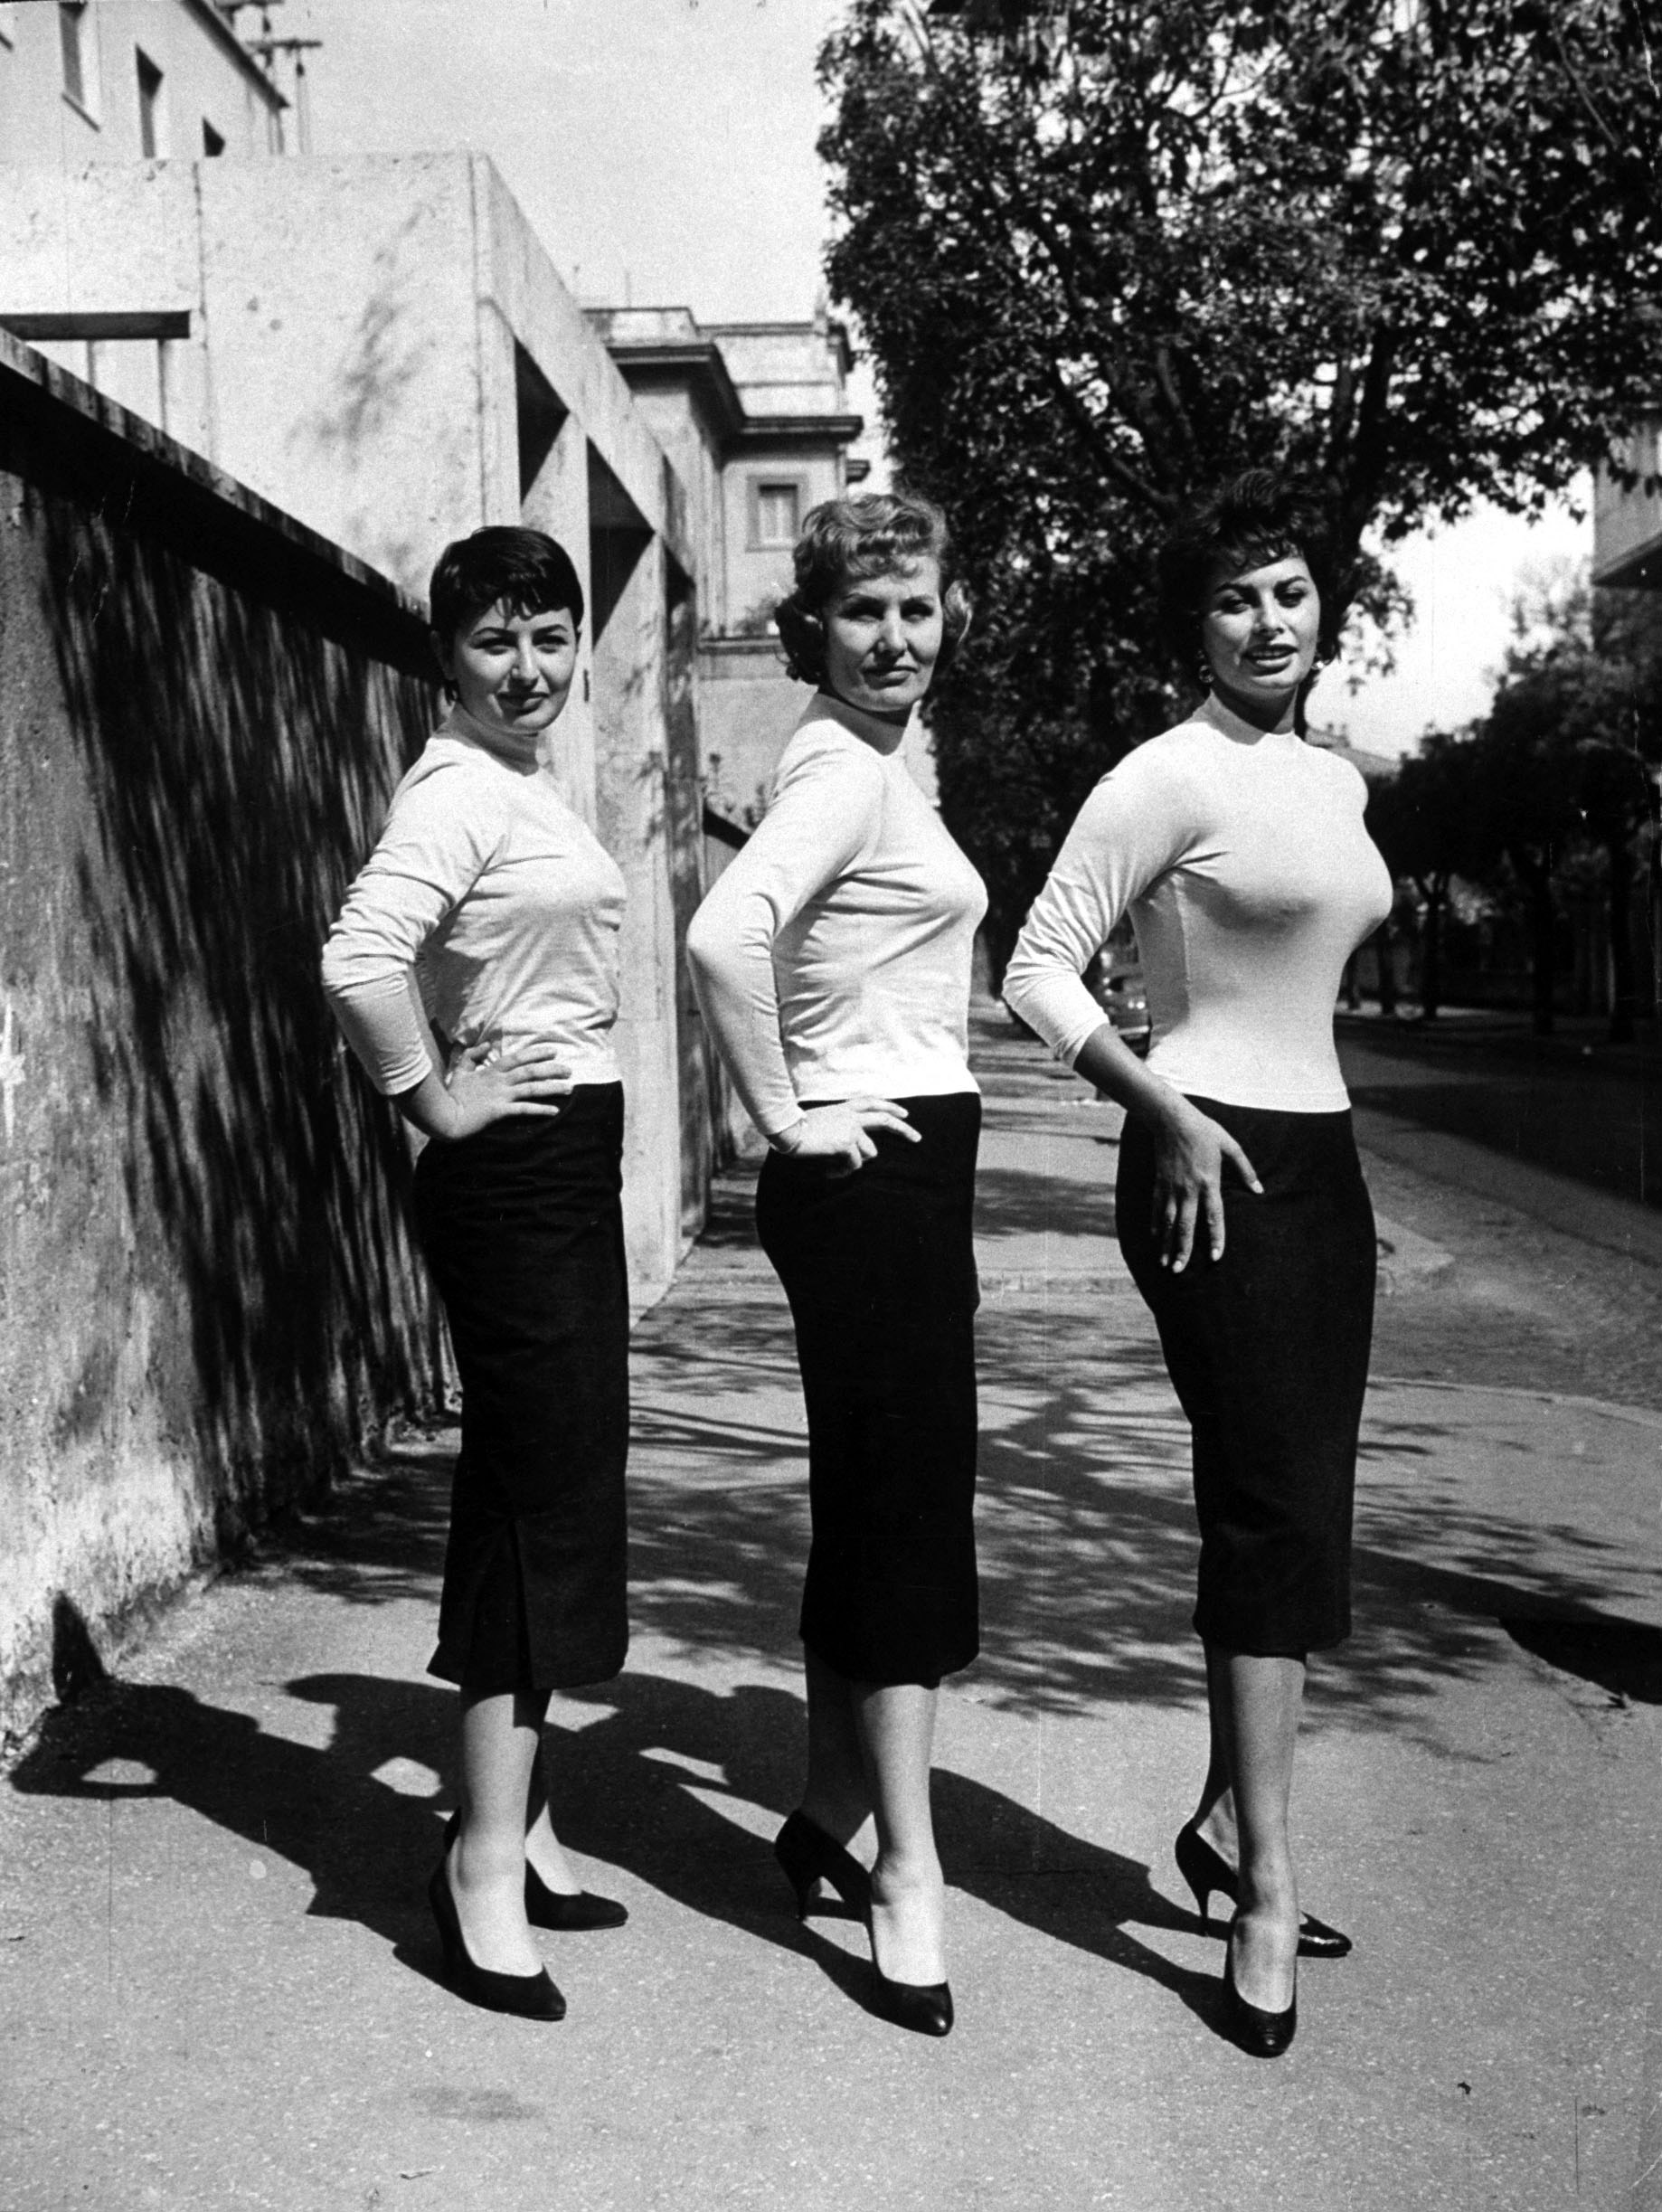 Sophia Loren (right) poses with her mother (center) and her sister, Maria, in 1957.